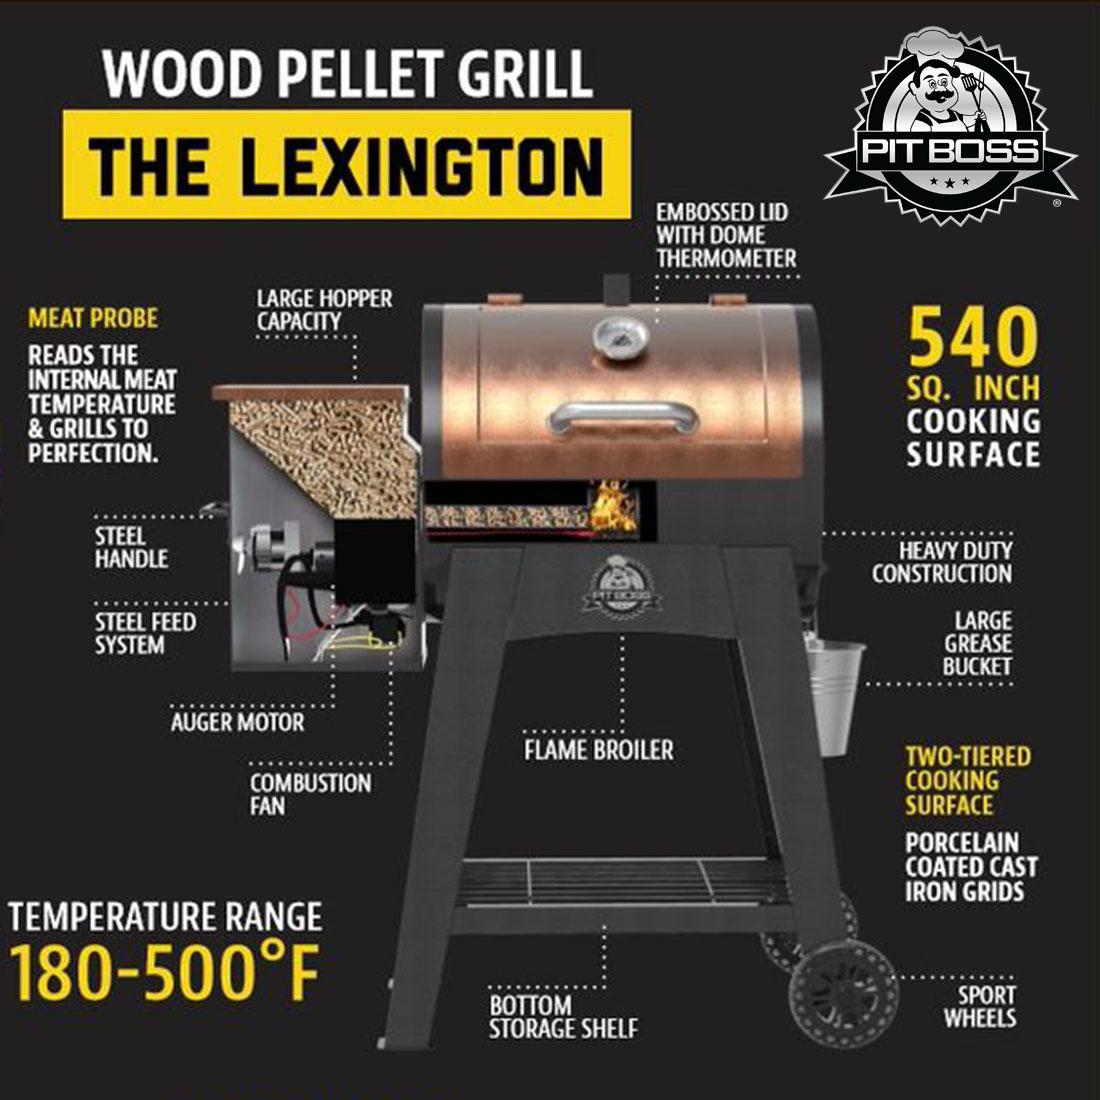 Pit Boss Lexington 540 Sq. In. Wood Pellet Grill With Flame Broiler and Meat Probe - image 8 of 10